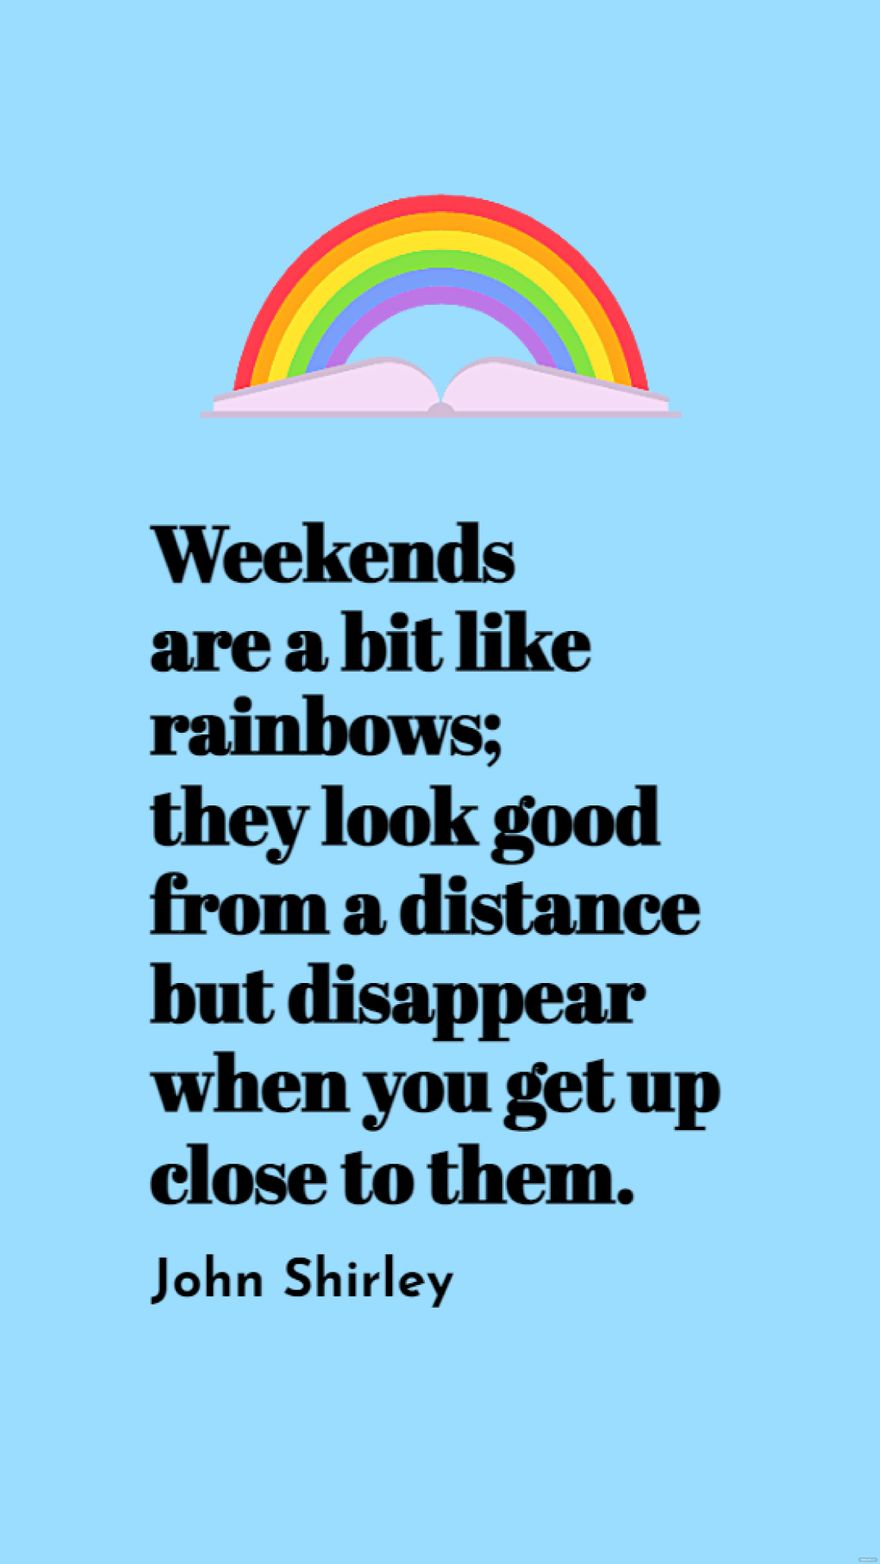 John Shirley - Weekends are a bit like rainbows; they look good from a distance but disappear when you get up close to them. 